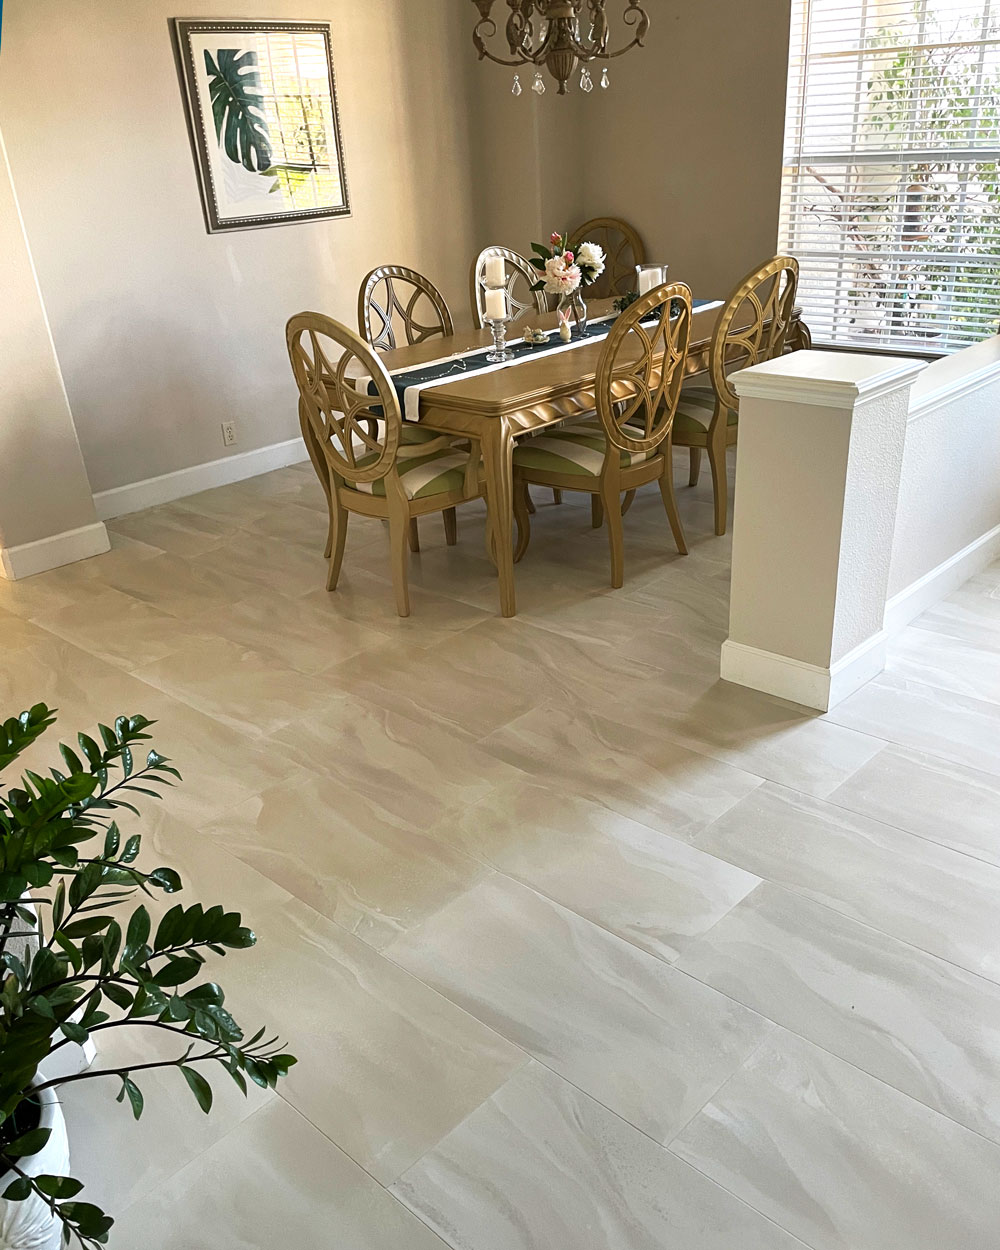 Dining room with white and grey tile planks